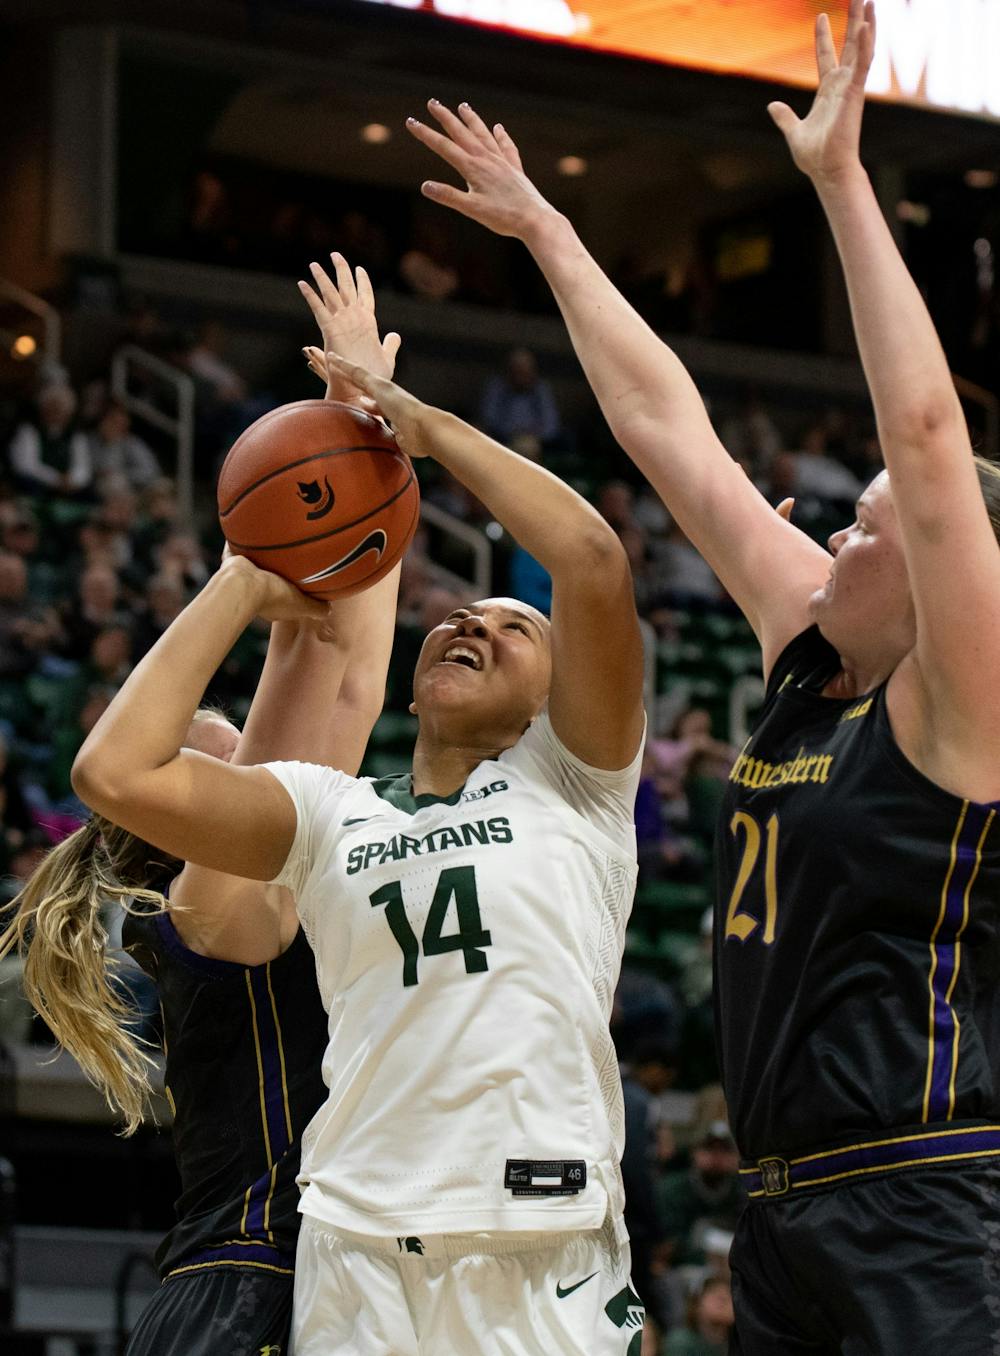 <p>Then-freshman forward Taiyier Parks (14) shoots from underneath the basket during the game against Northwestern Jan. 23, 2020 at the Breslin Center. The Spartans fell to the Wildcats, 76-48.</p>